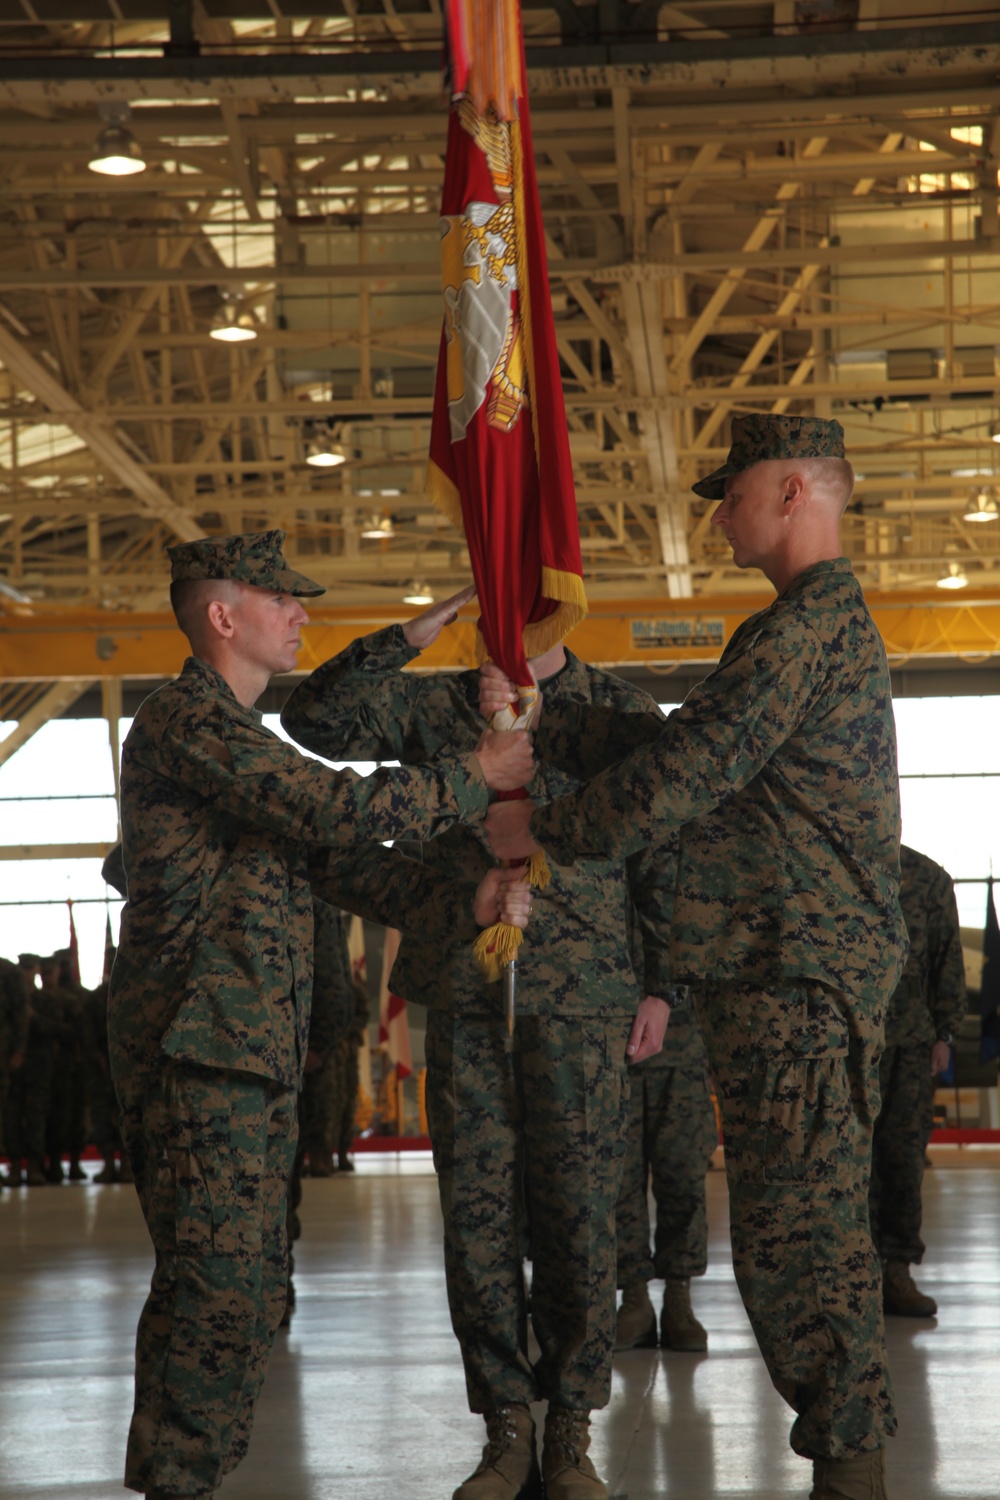 VMA-231 XO takes reigns as CO during change of command